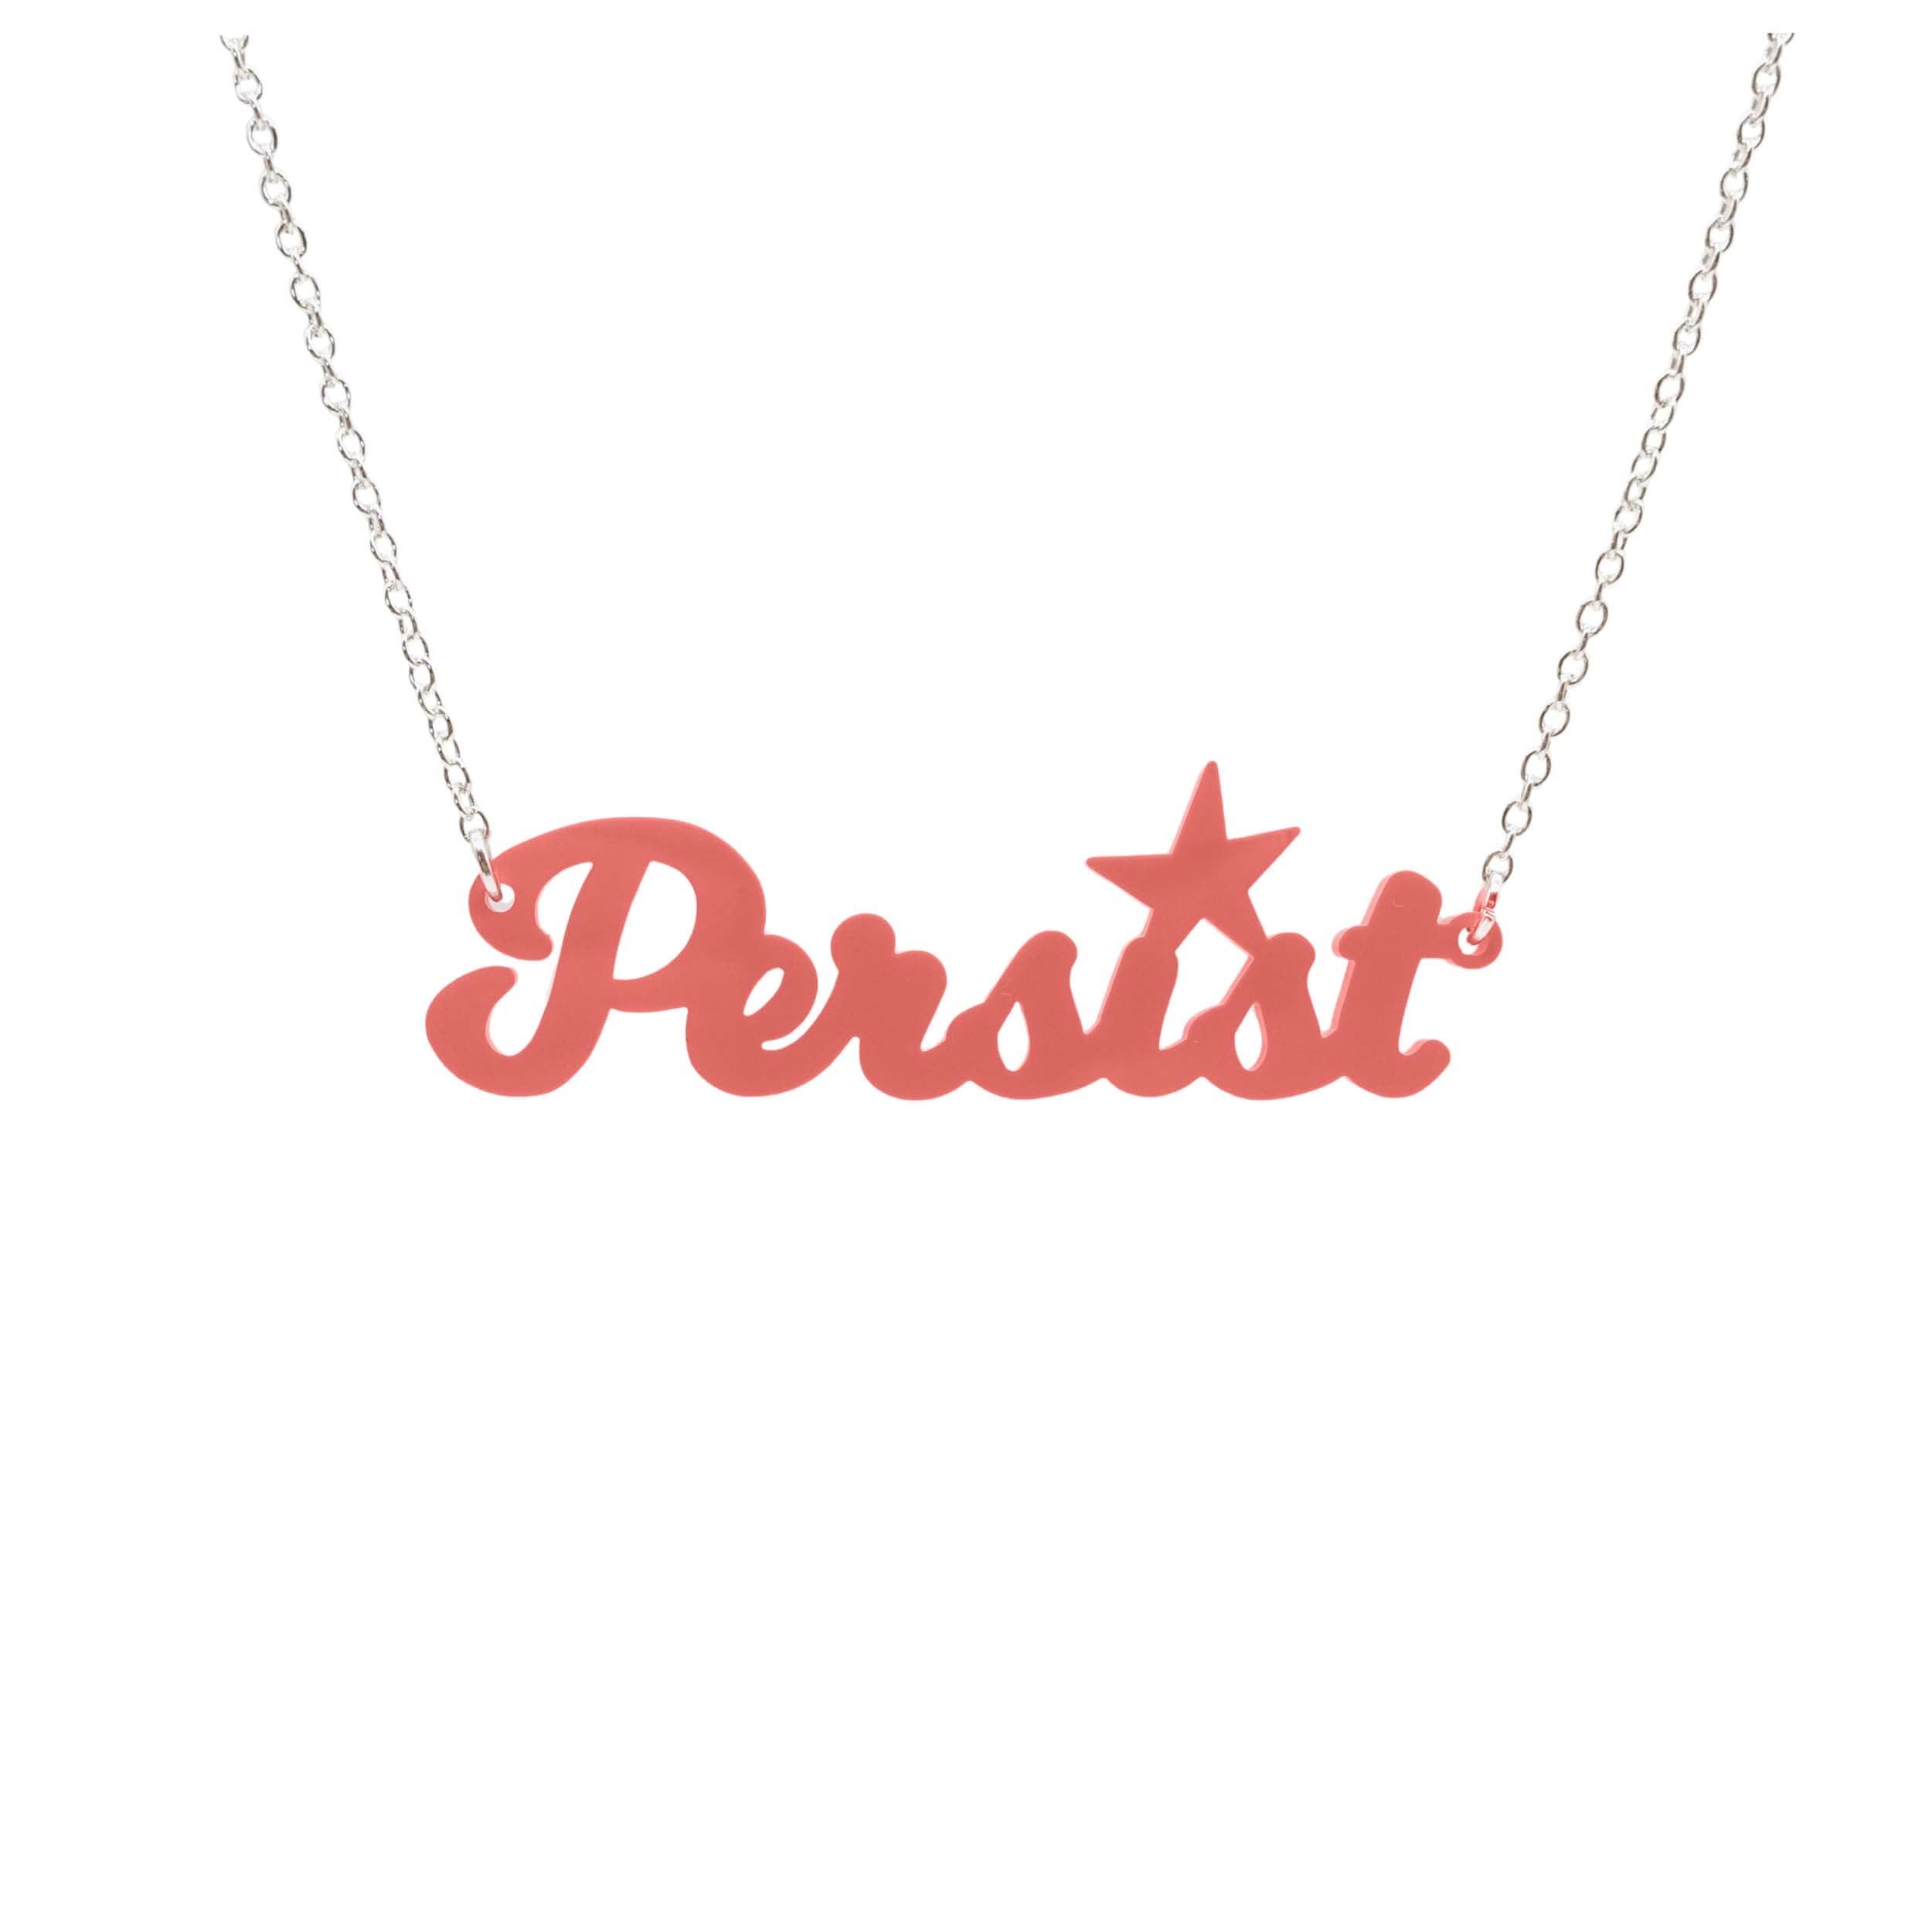 Persist necklace in script font in sunset pink, shown hanging on a white background. Join the Persisterhood! 